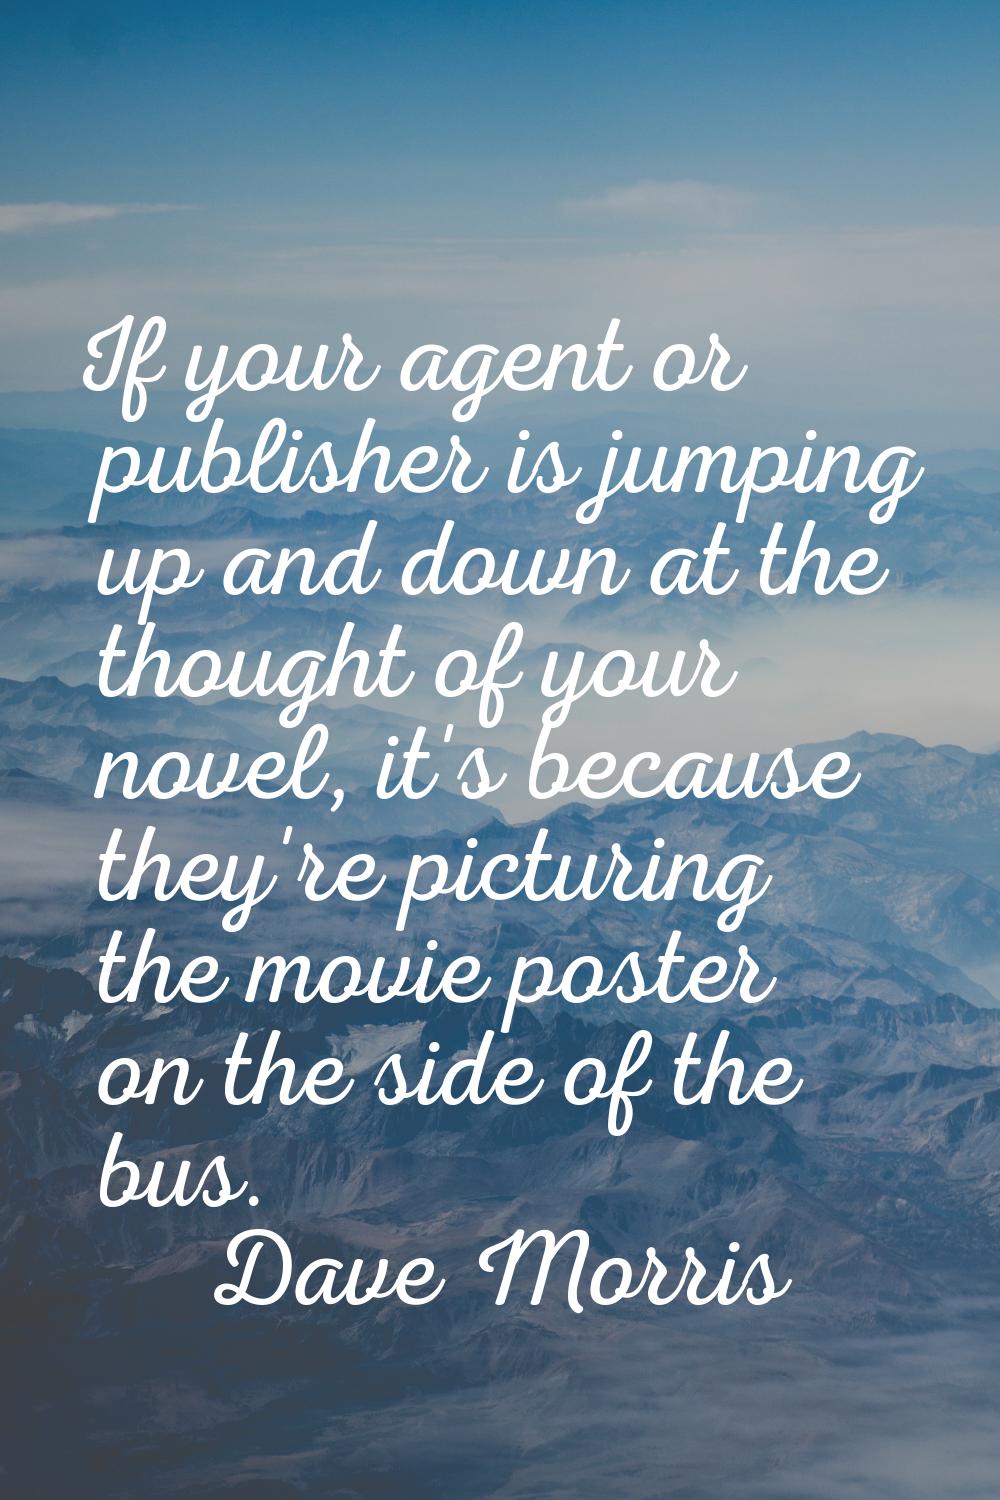 If your agent or publisher is jumping up and down at the thought of your novel, it's because they'r